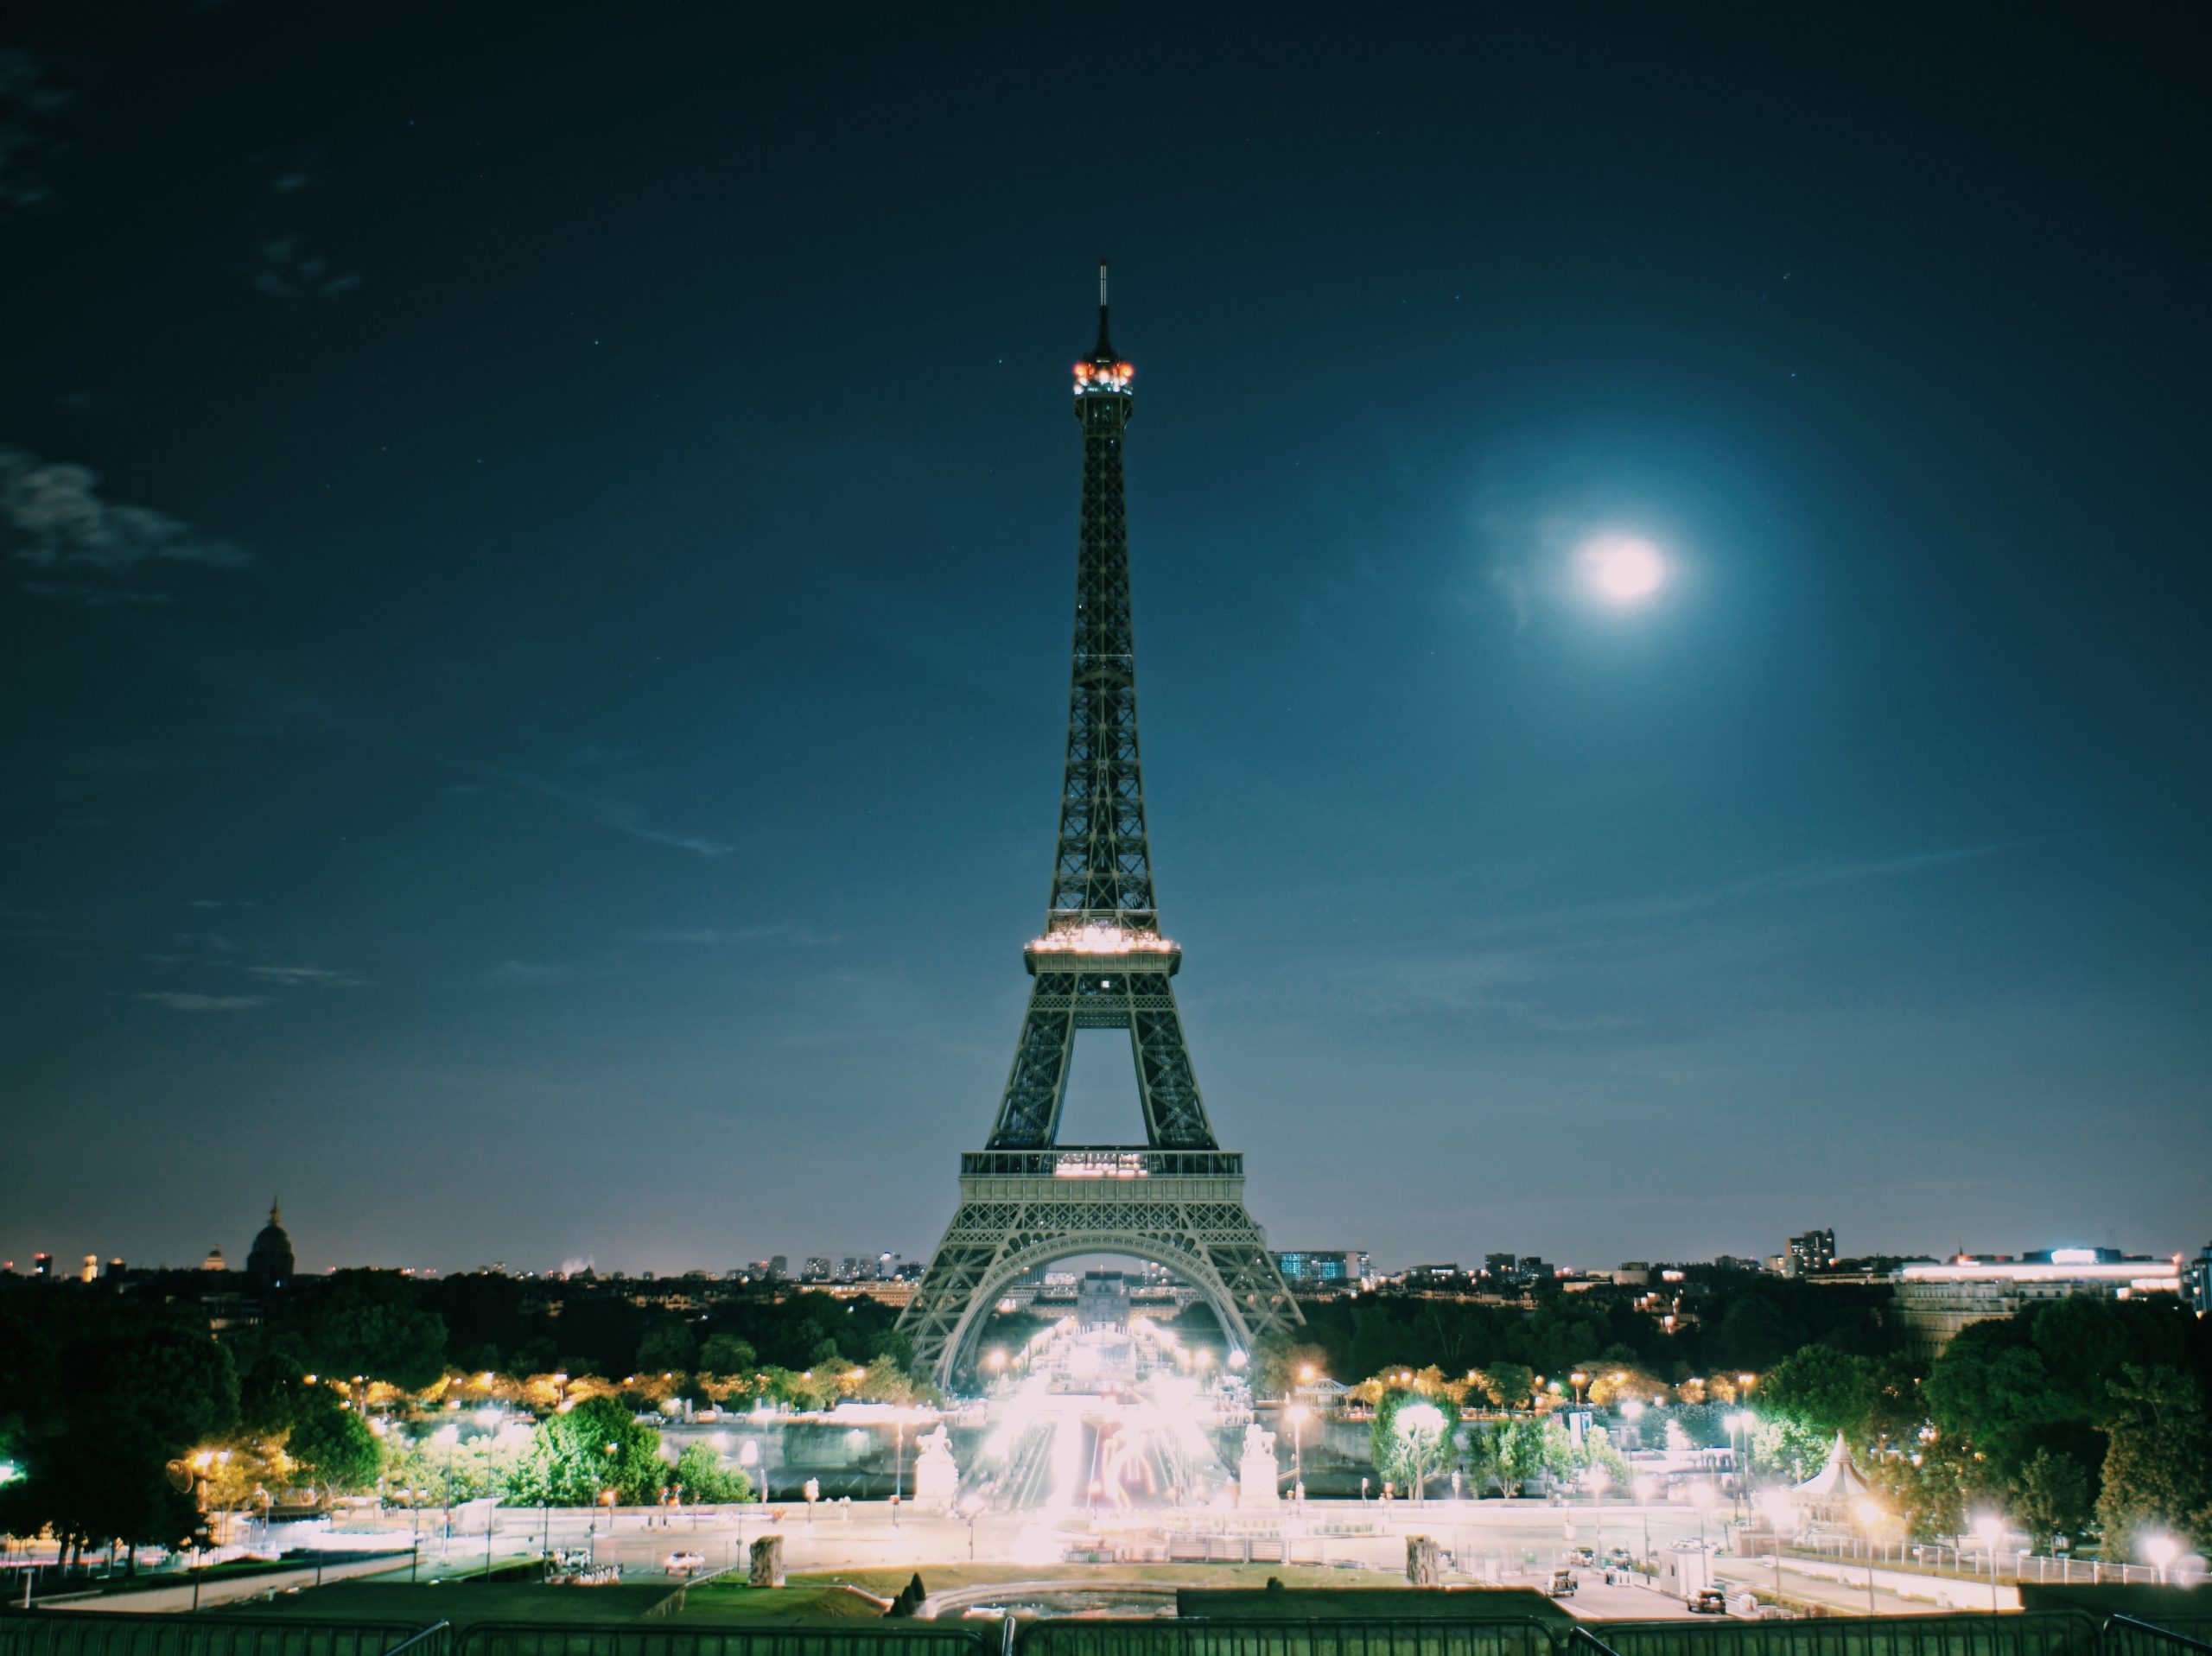 Eiffel Tower at night with spot lights